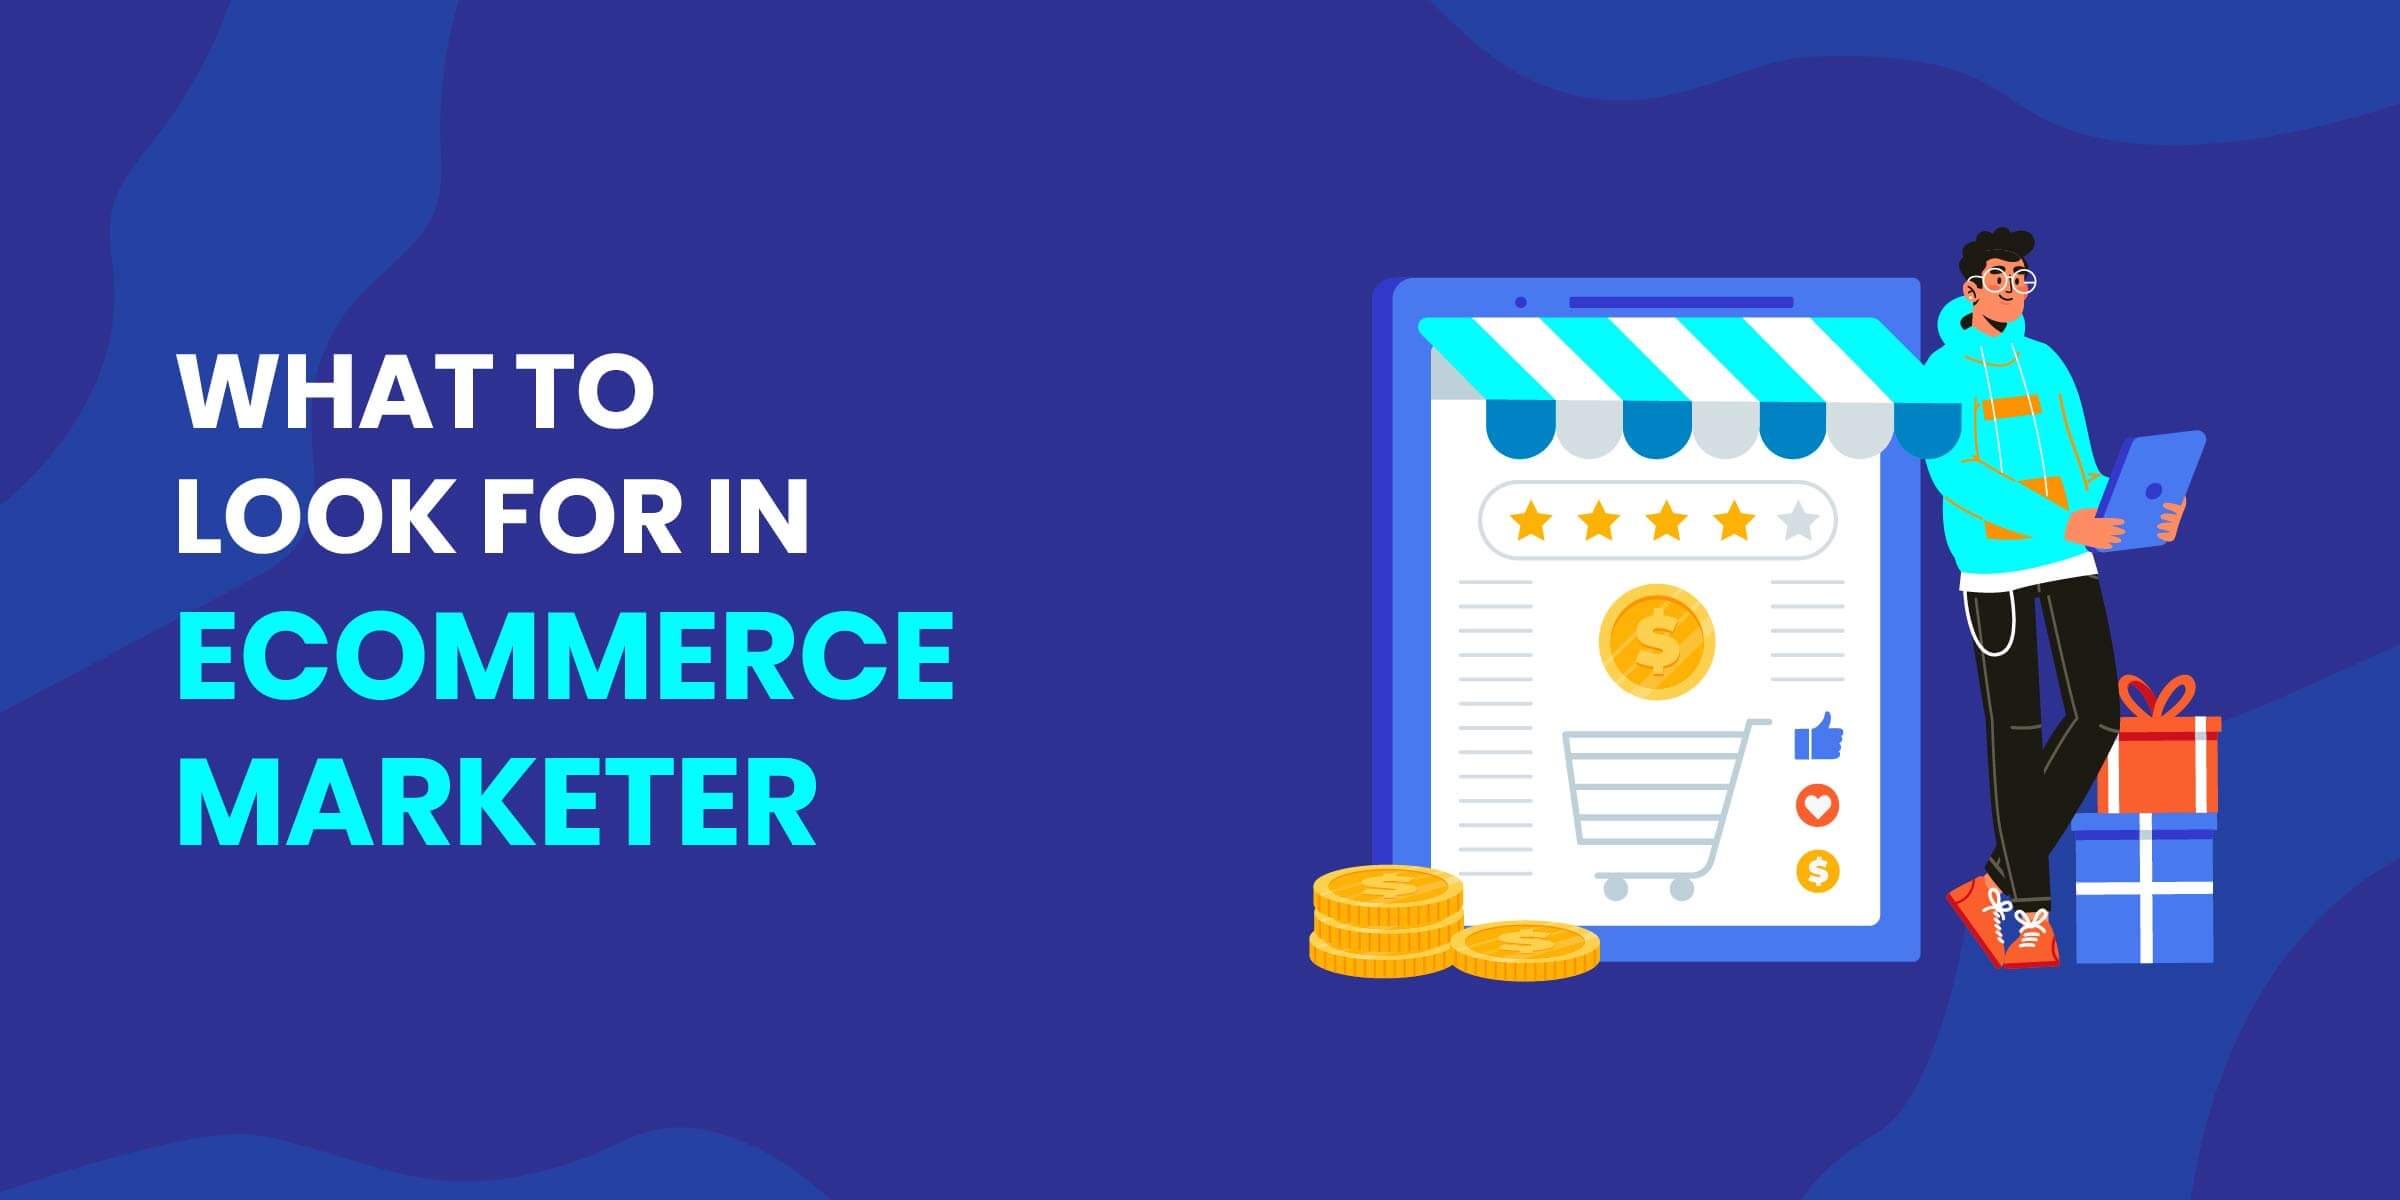 What to Look for in eCommerce Marketer